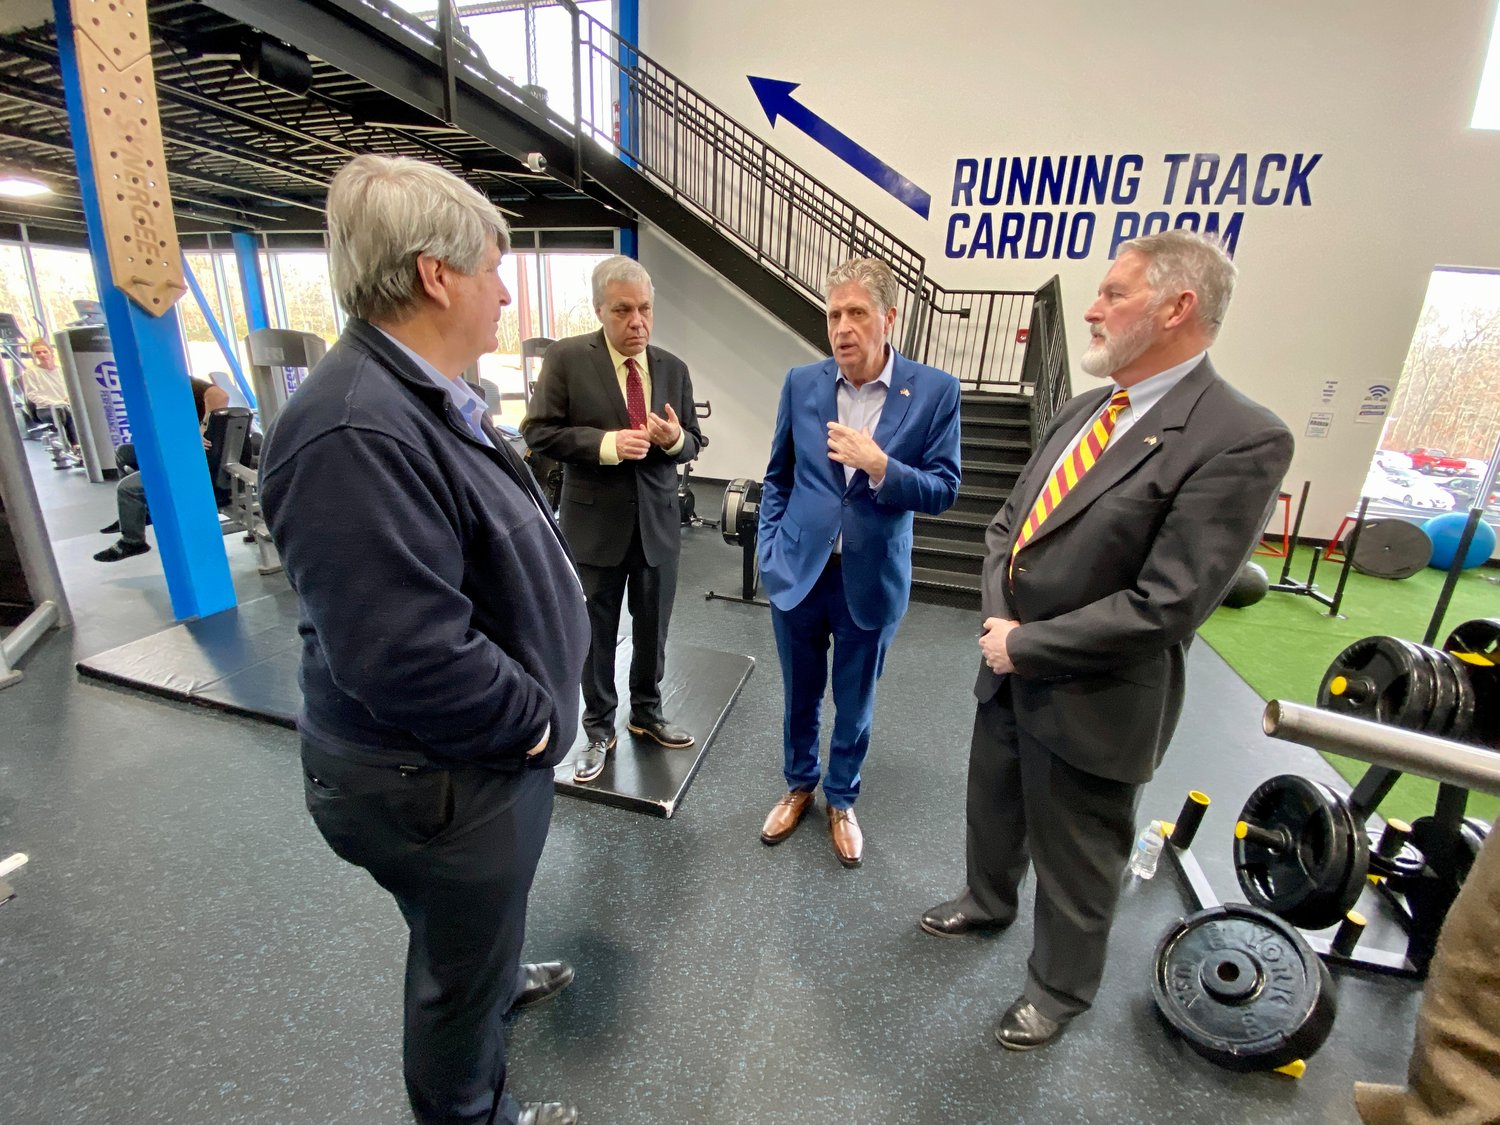 Gov. Dan McKee (second from right) talks about the Longplex facility with Tiverton Town Administrator Chris Cotta (left) and District 70 Rep. John Edwards of Tiverton (right).